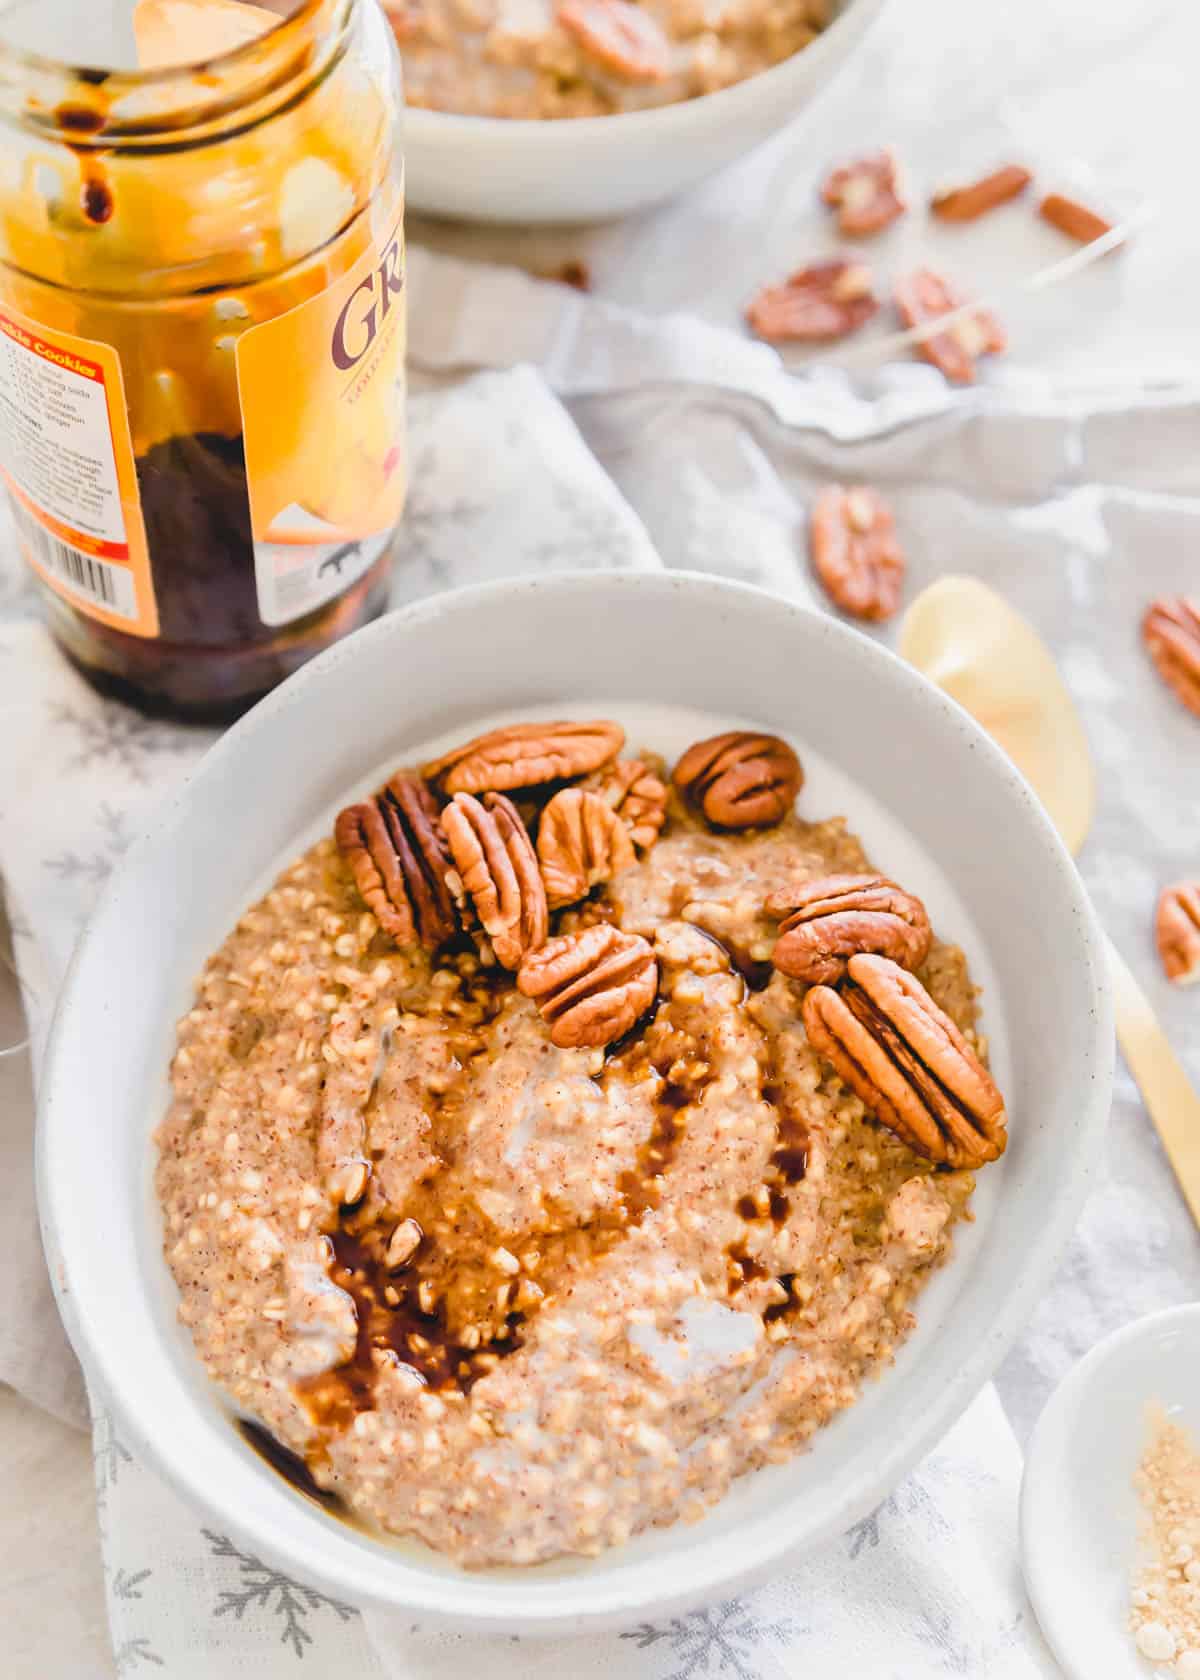 Creamy, cozy gingerbread oats made in 15 minutes on the stove top.